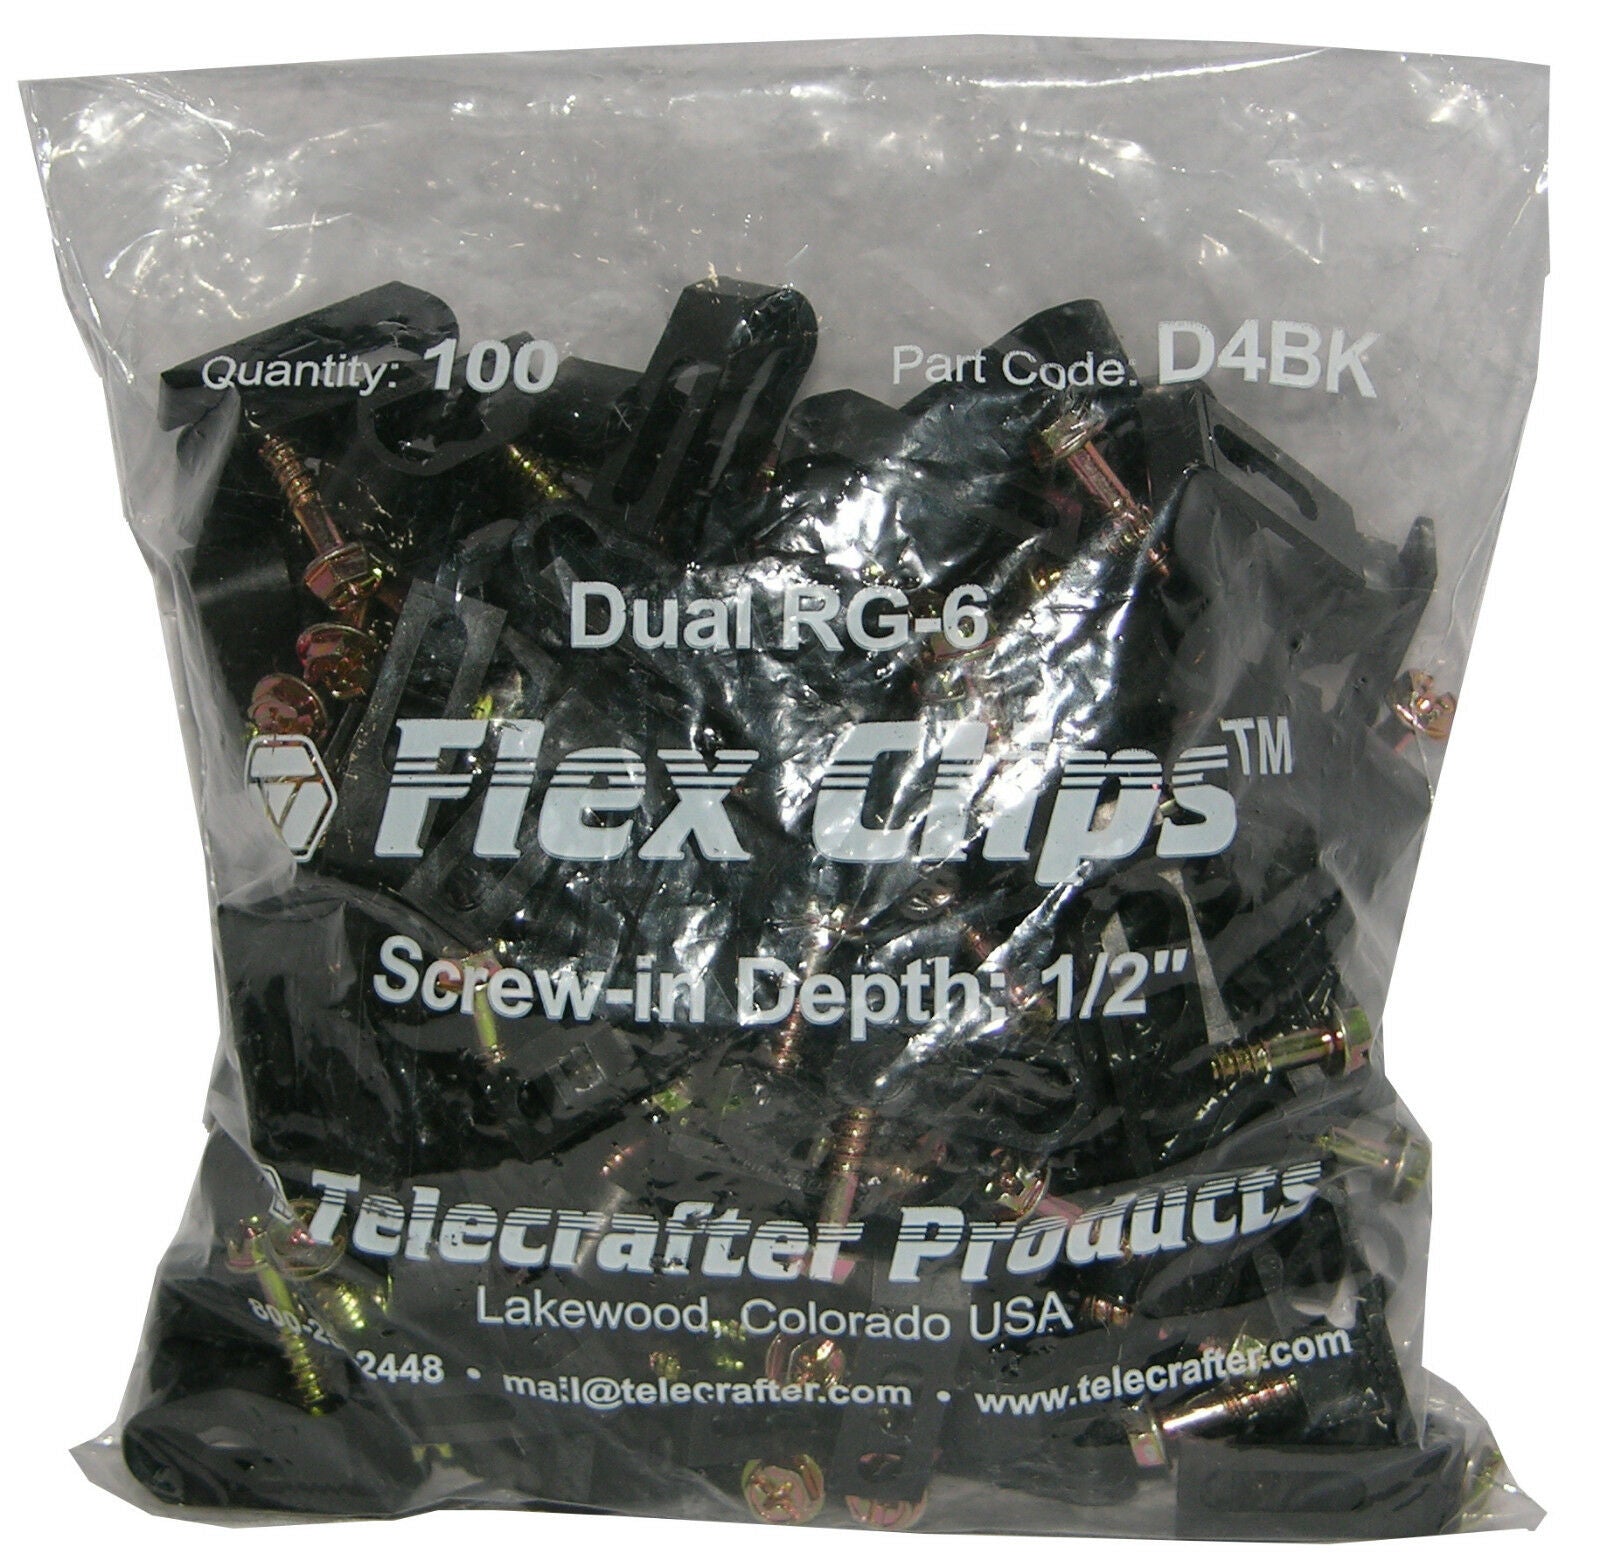 Telecrafter, Telecrafter D4BK, Flex Clips for dual RG-6 or RG-59 Coax cable, 1/2" screw, 100/bag